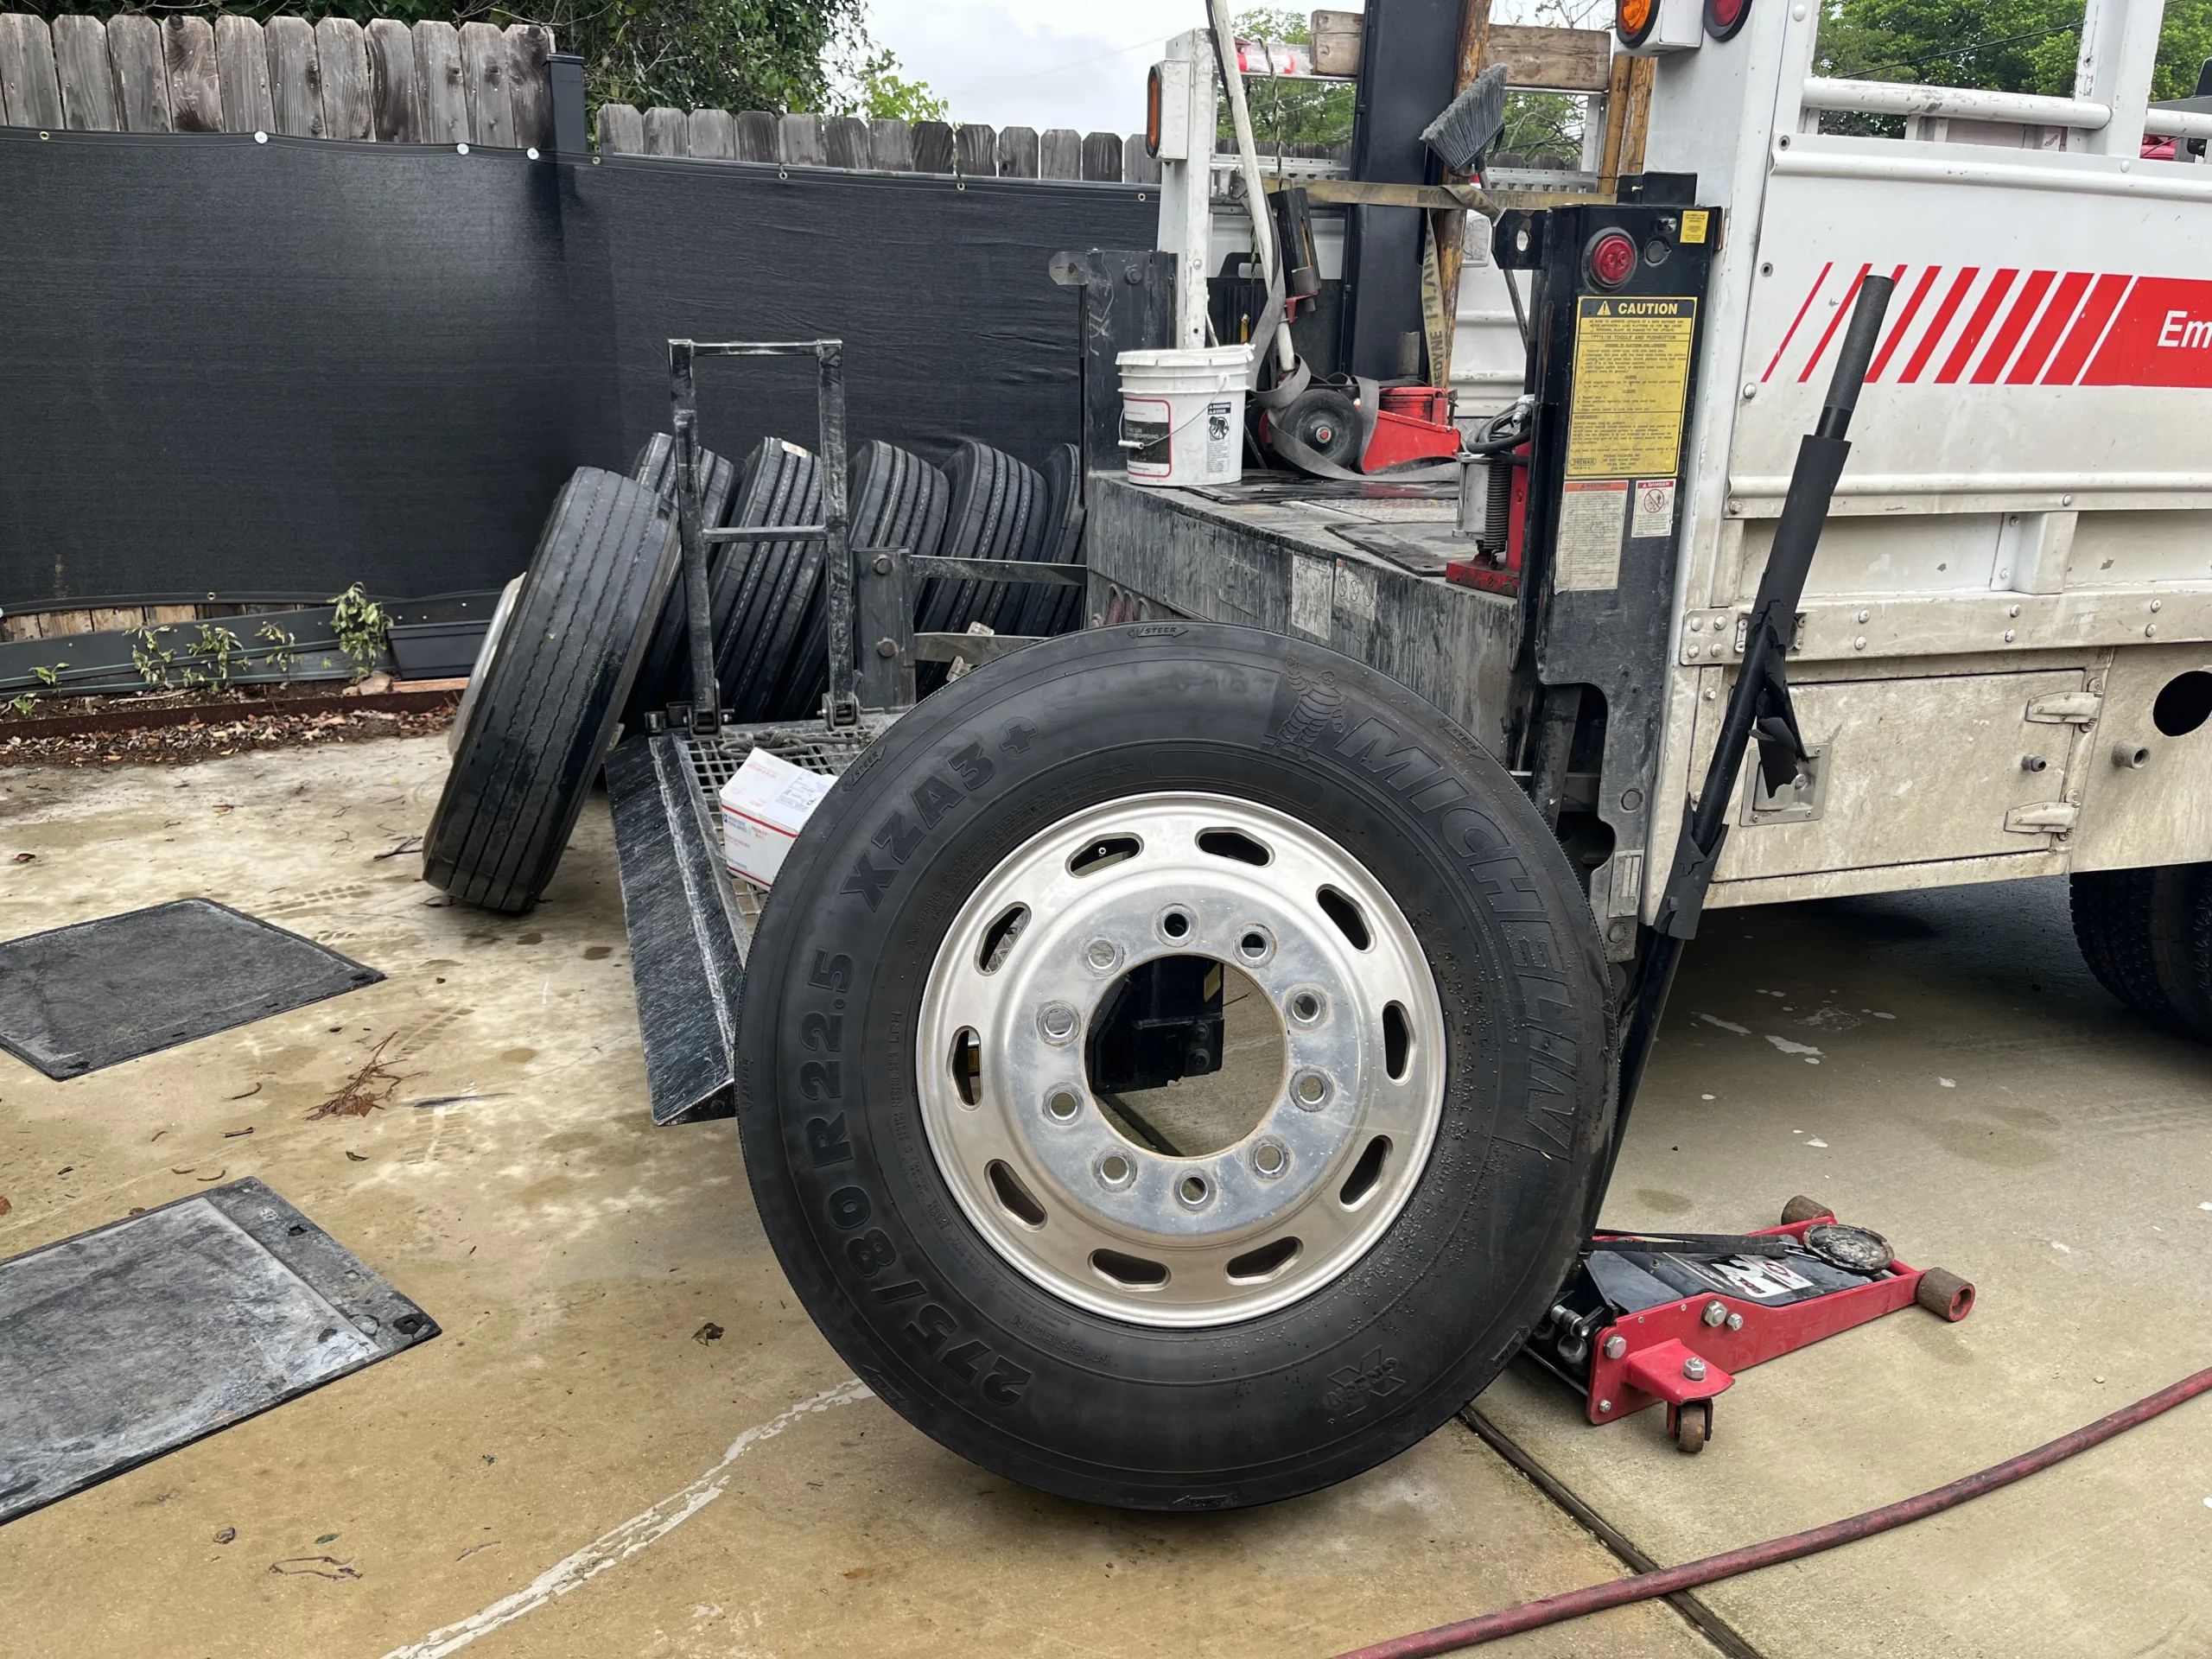 A mobile RV tire replacement vehicle loaded with tires.